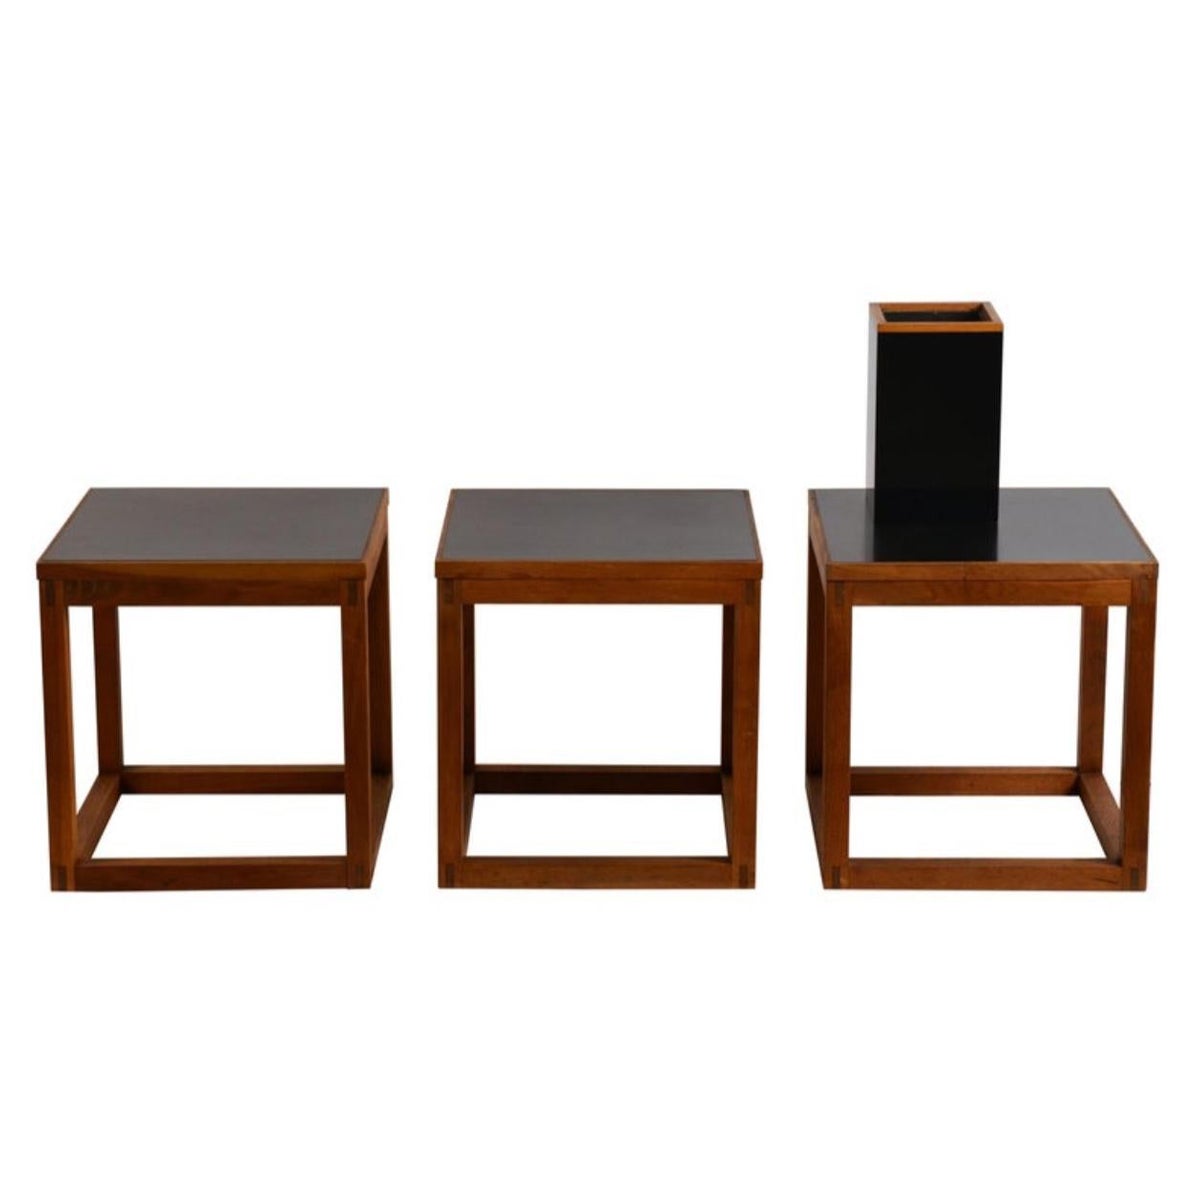 Set of 3 Minimal Teak and Laminate Cube Tables with Matching Lamp For Sale